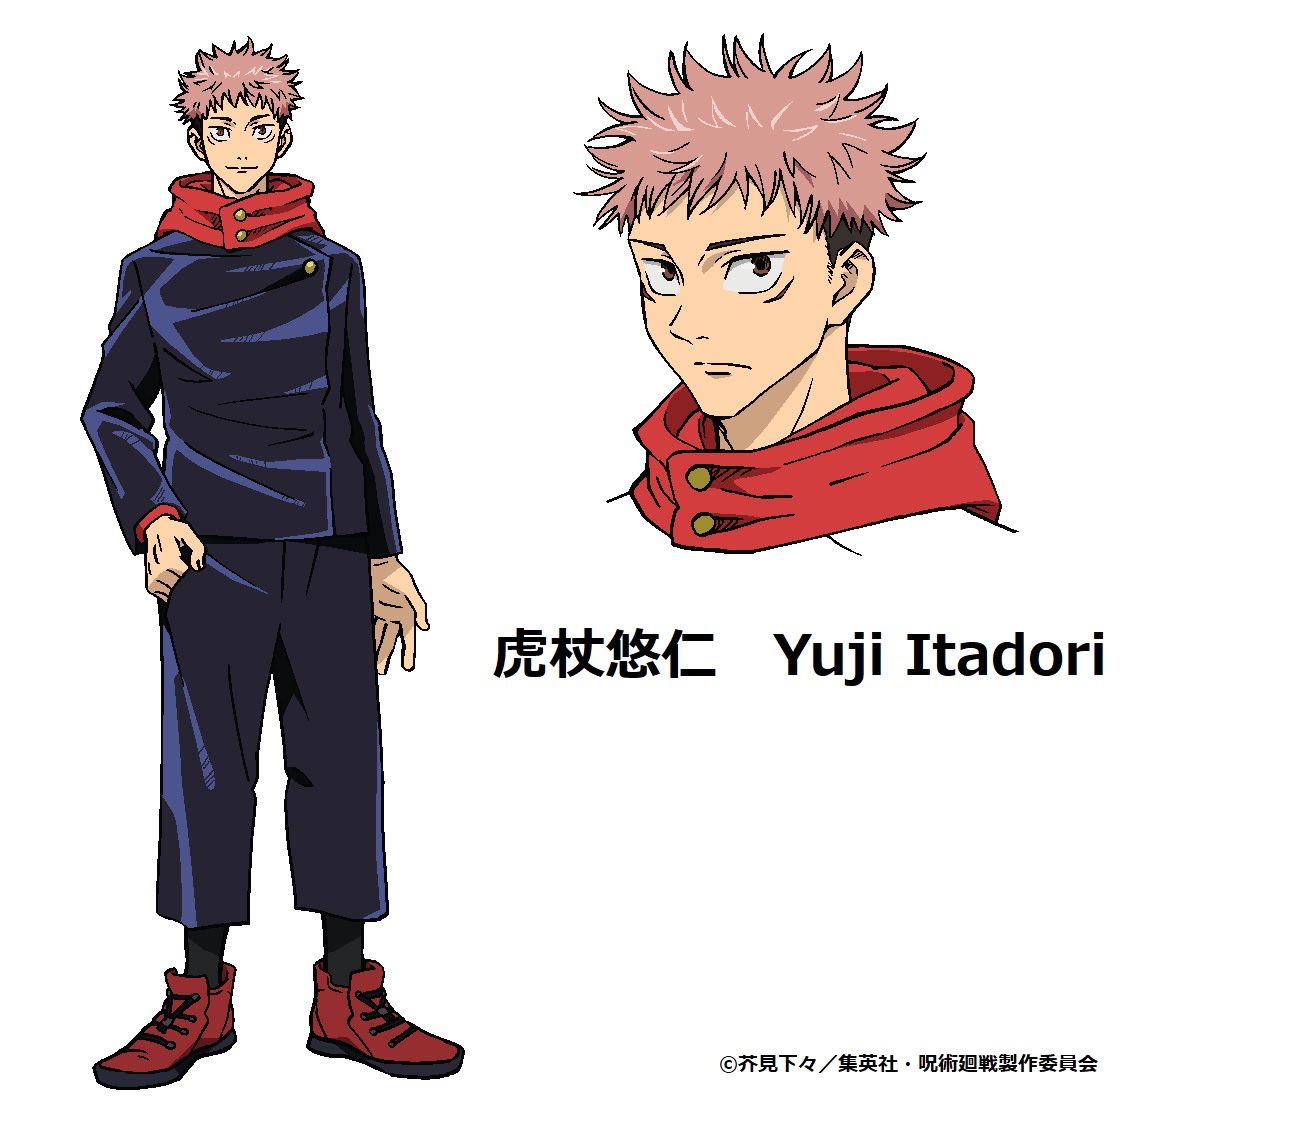 Jujutsu Kaisen Jujutsu Kaisen Character Designs For The Anime By Mappa That Will Premiere October T Co Gdfjiyfacb Twitter